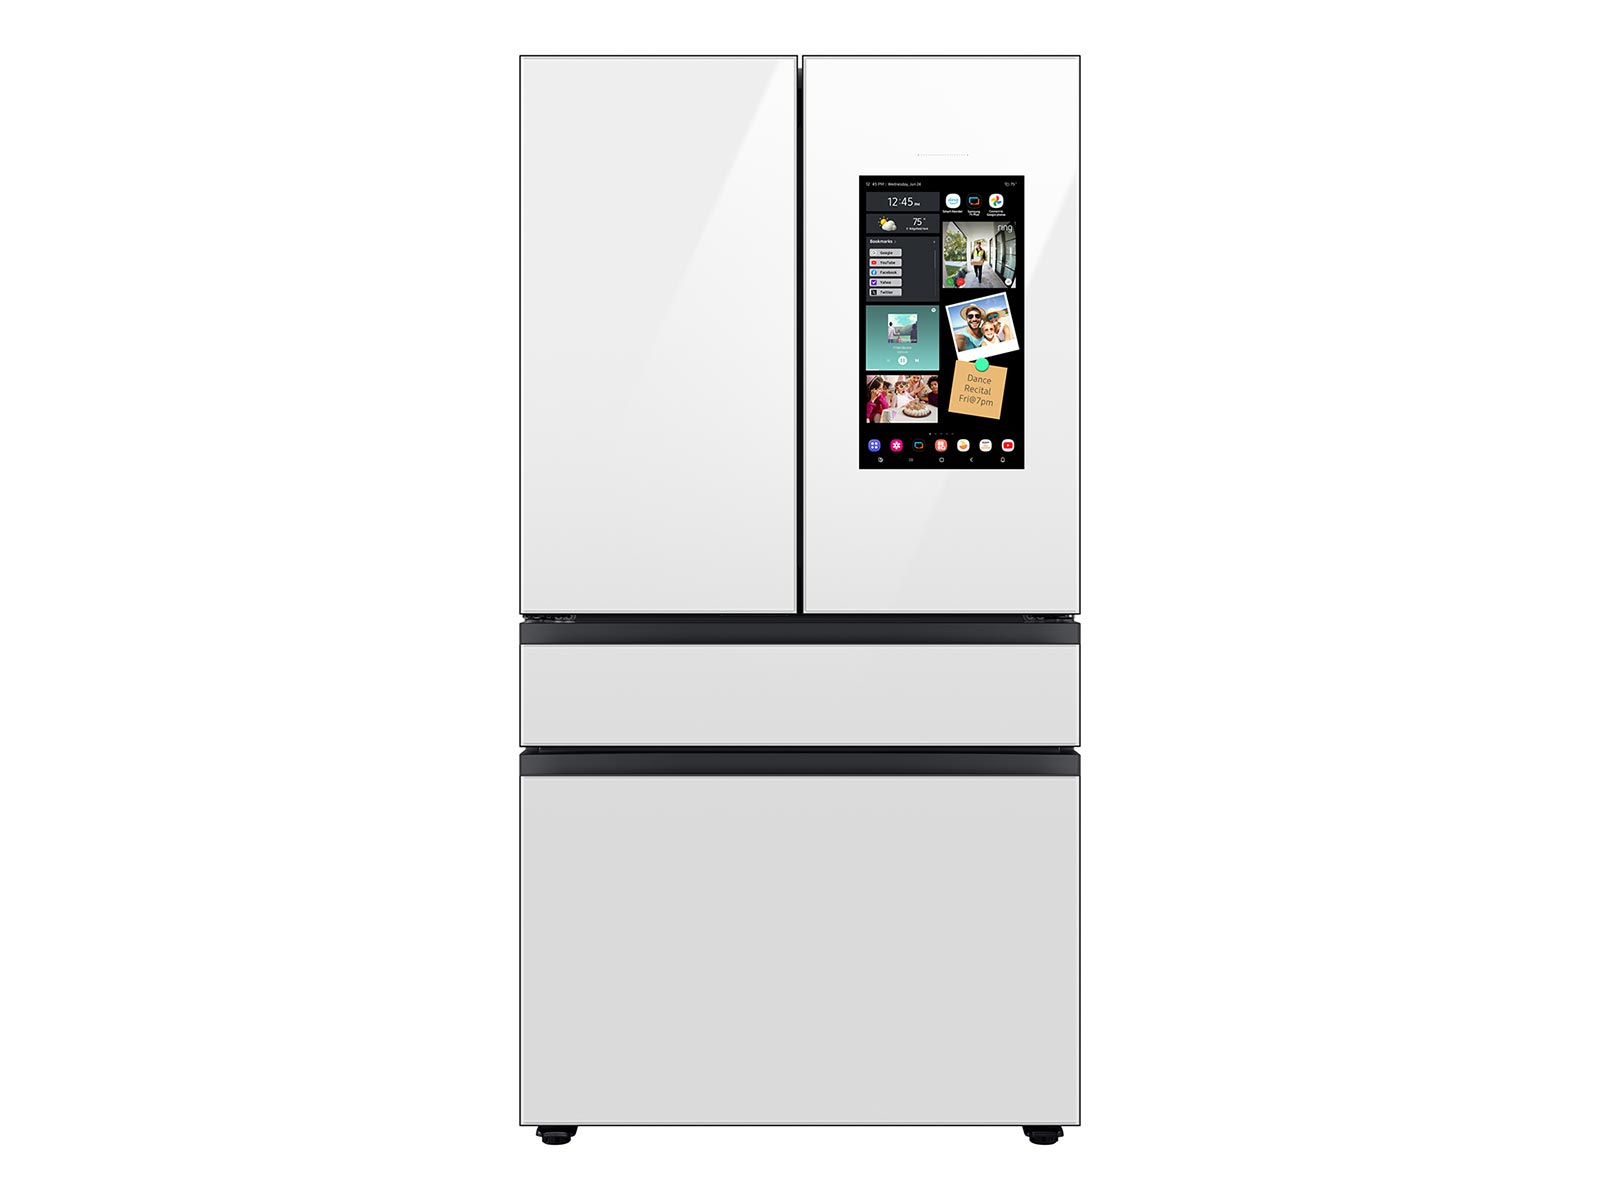 Bespoke 4-Door French Door Refrigerator (23 cu. ft.) – with Family Hub™ Panel in White Glass – (with Customizable Door Panel Colors) in White Glass